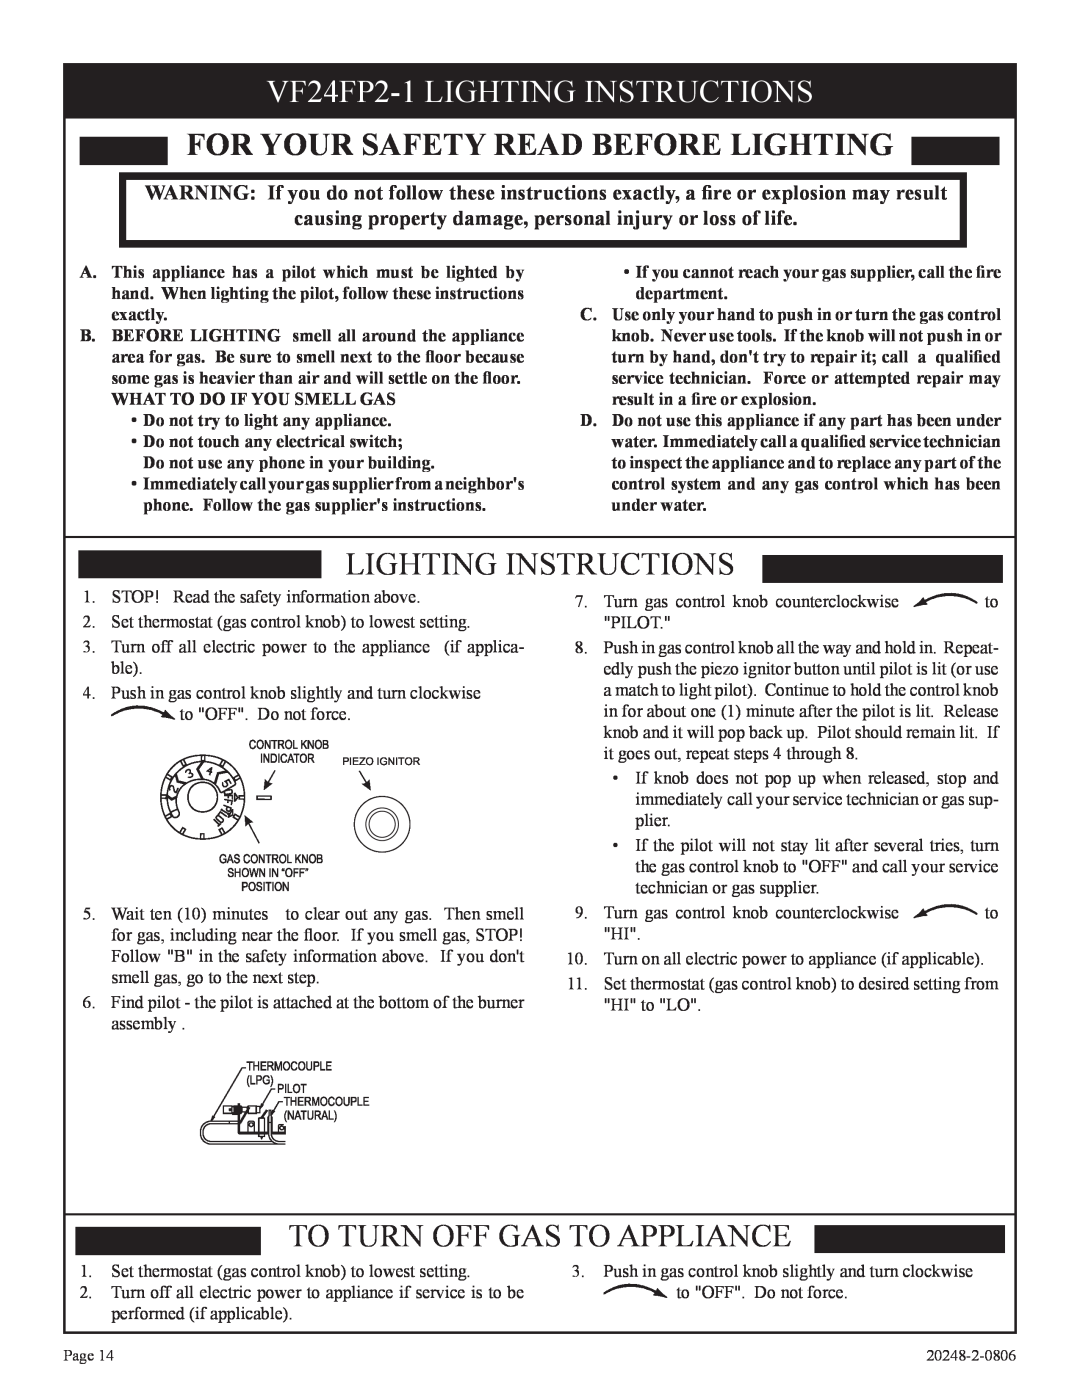 Empire Comfort Systems VF24FP2-1LIGHTING INSTRUCTIONS, For Your Safety Read Before Lighting, Lighting Instructions 